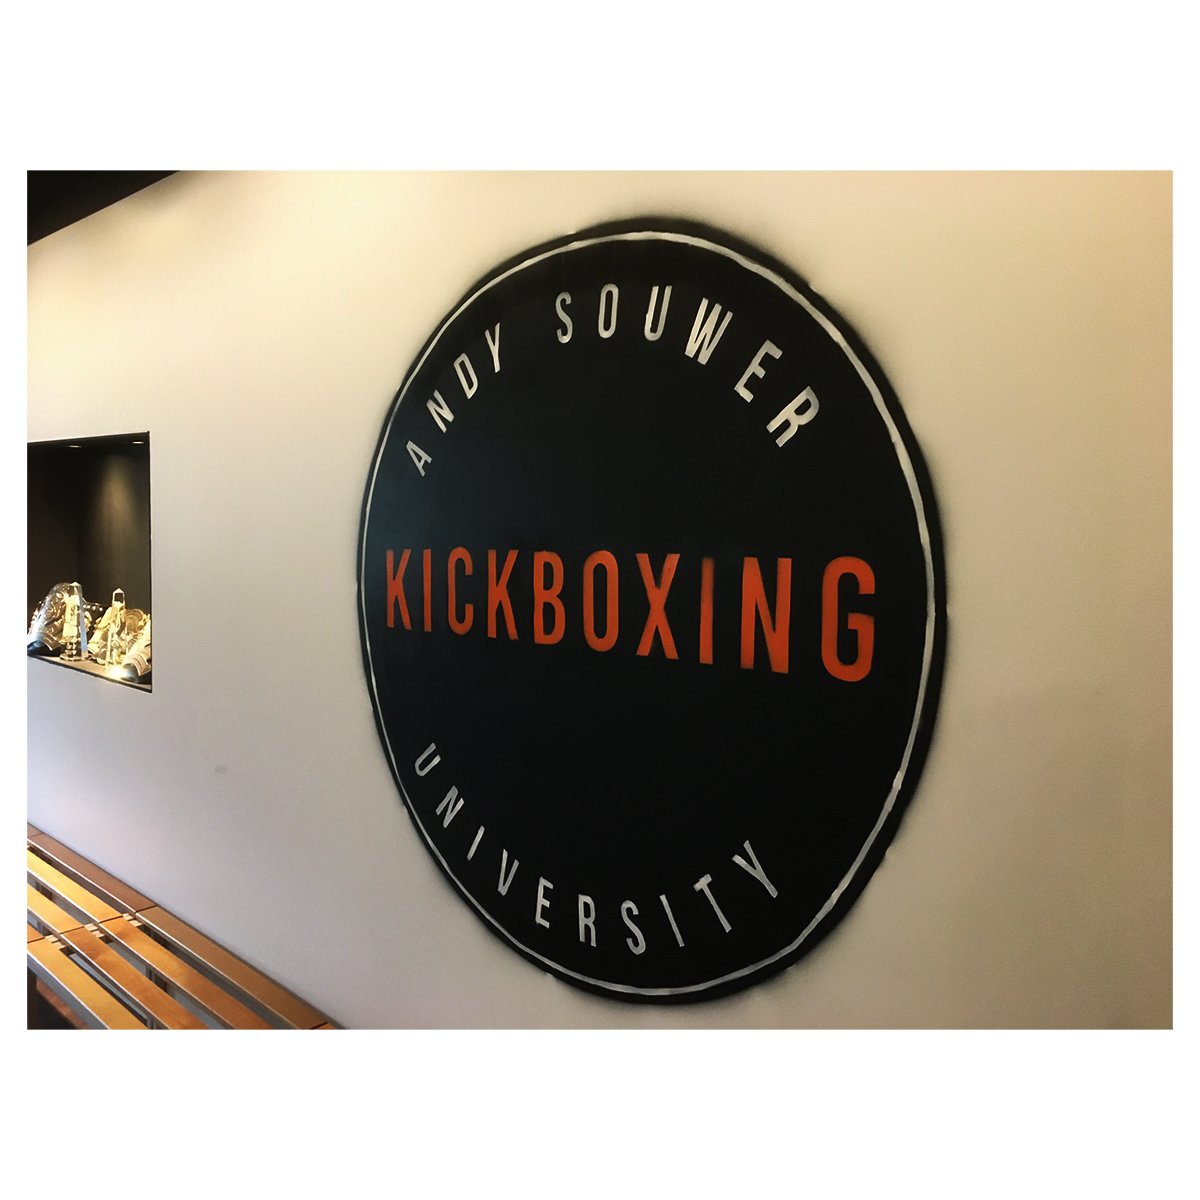 ANDY SOUWER KICKBOXING UNIVERSITY 01 - Mural - Frank Willems